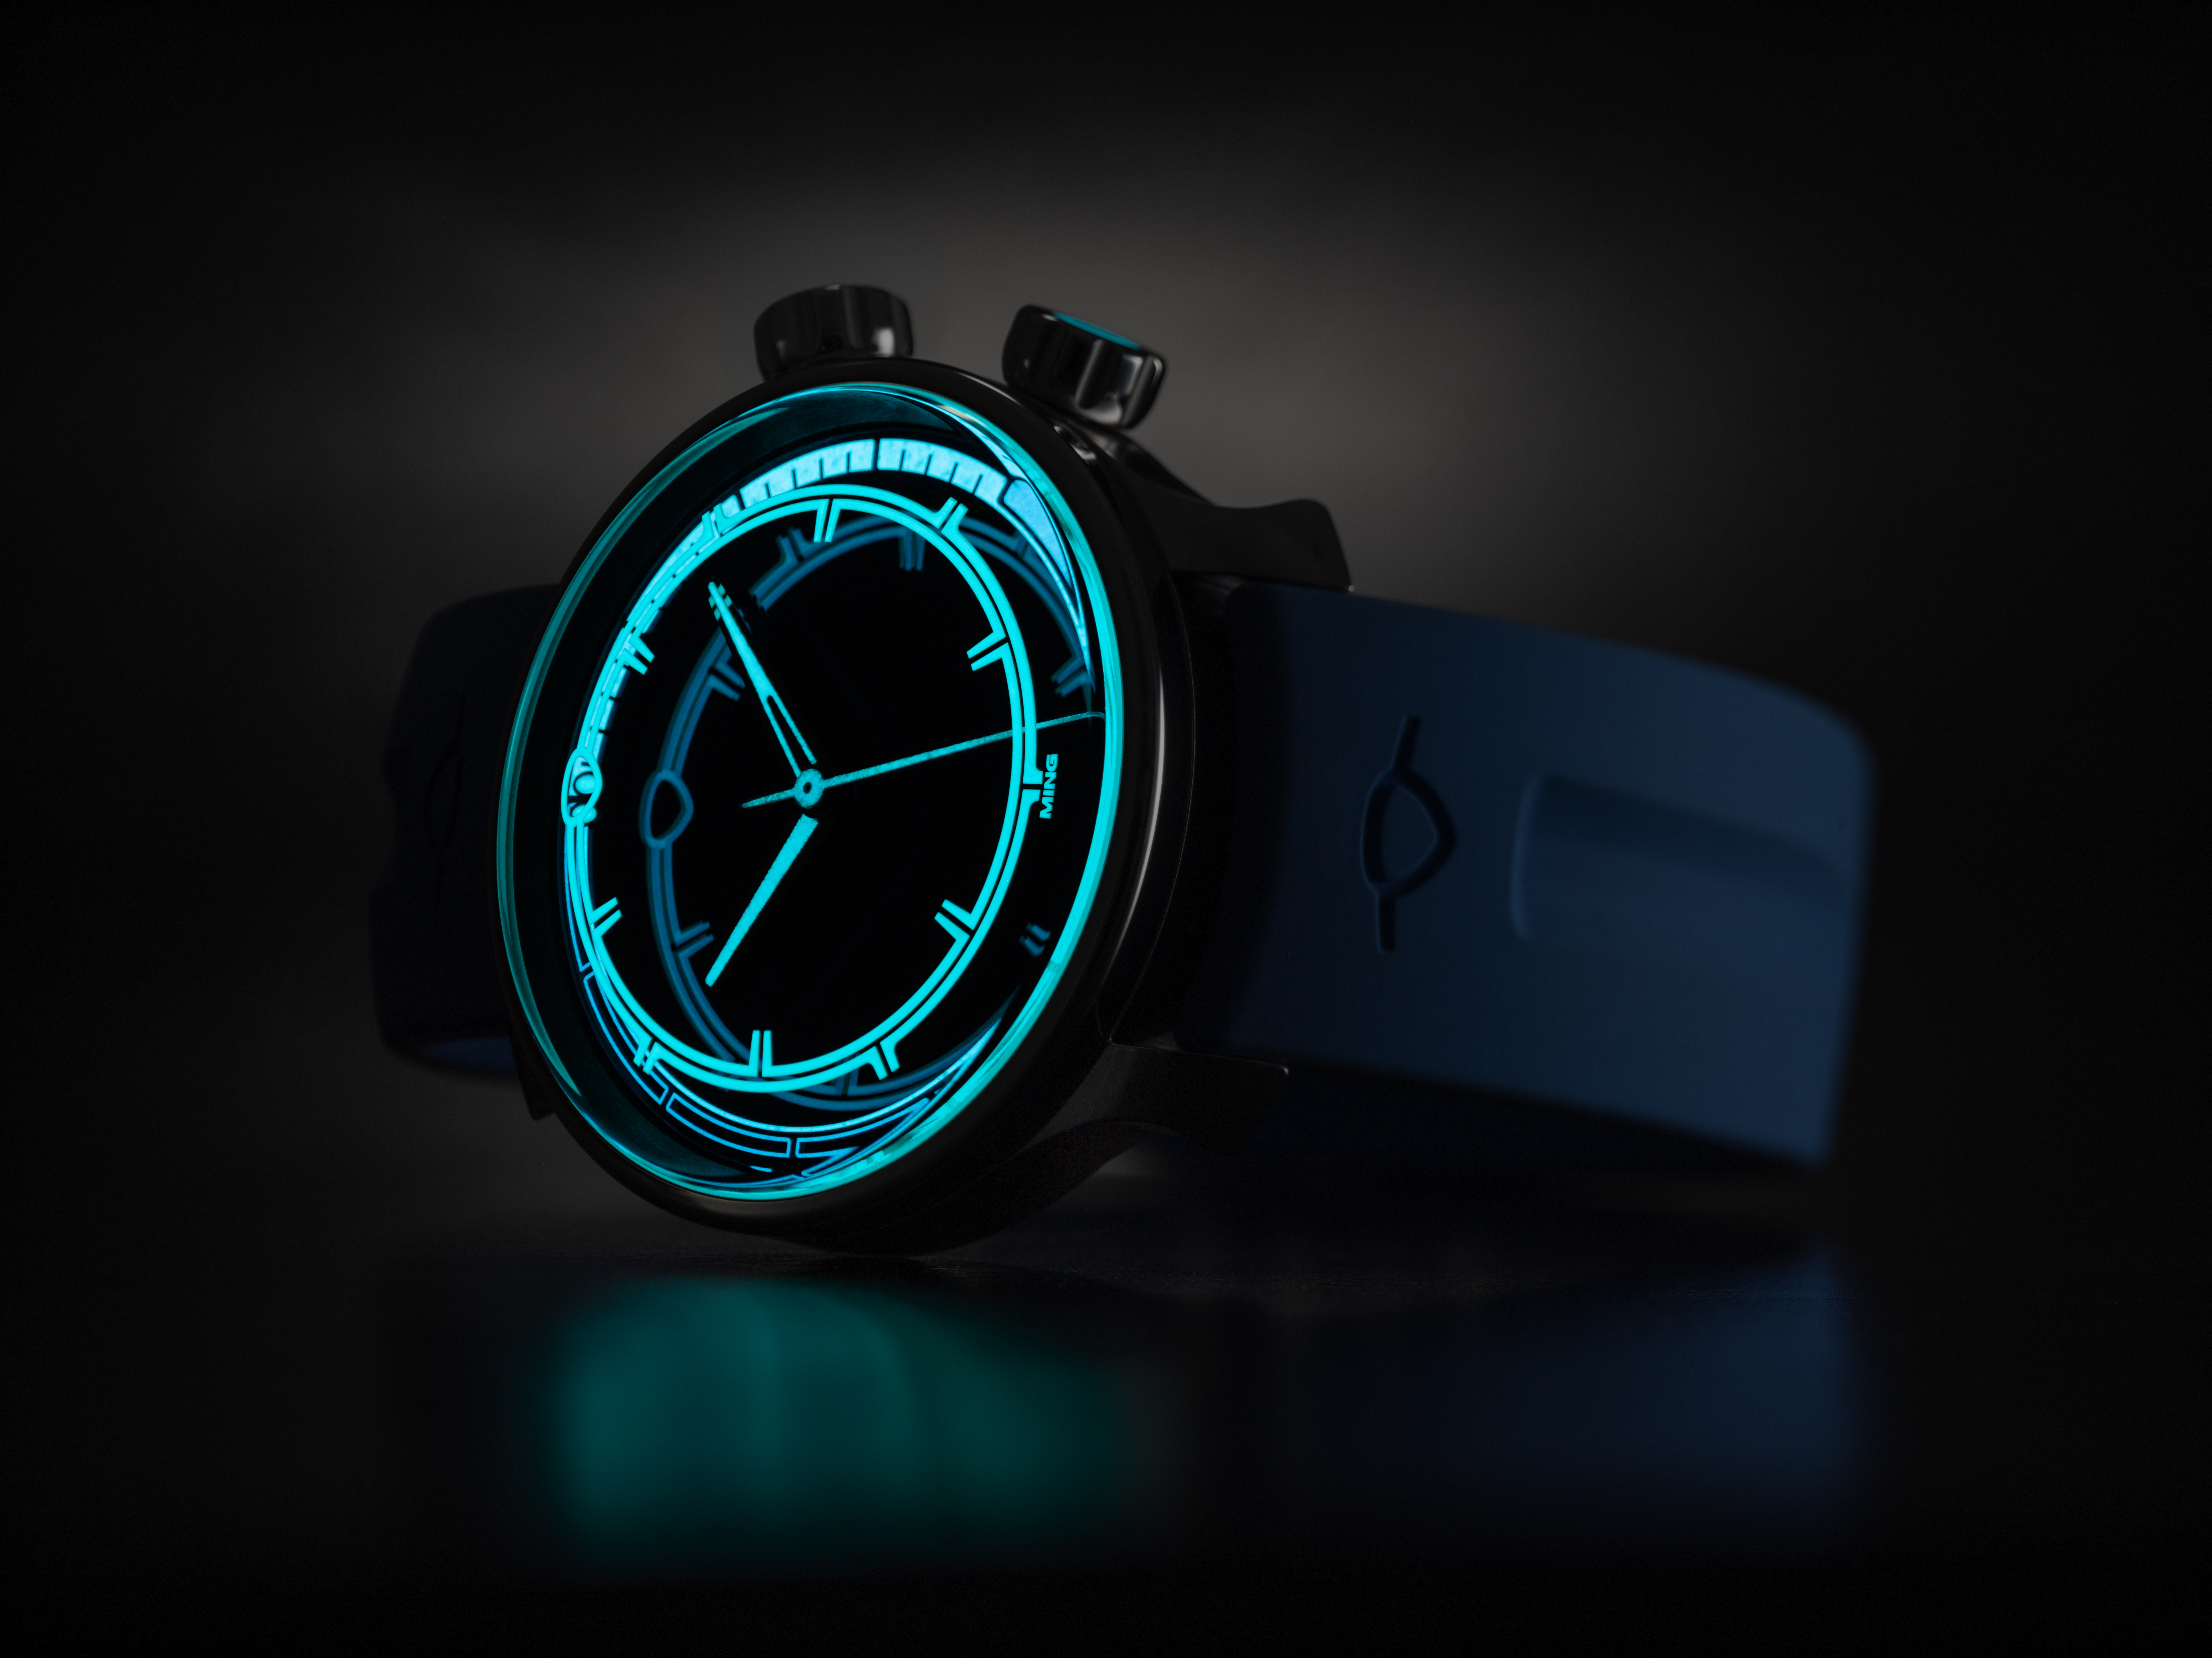 Dive watch at night with glowing Super-LumiNova X1 on dial and hands